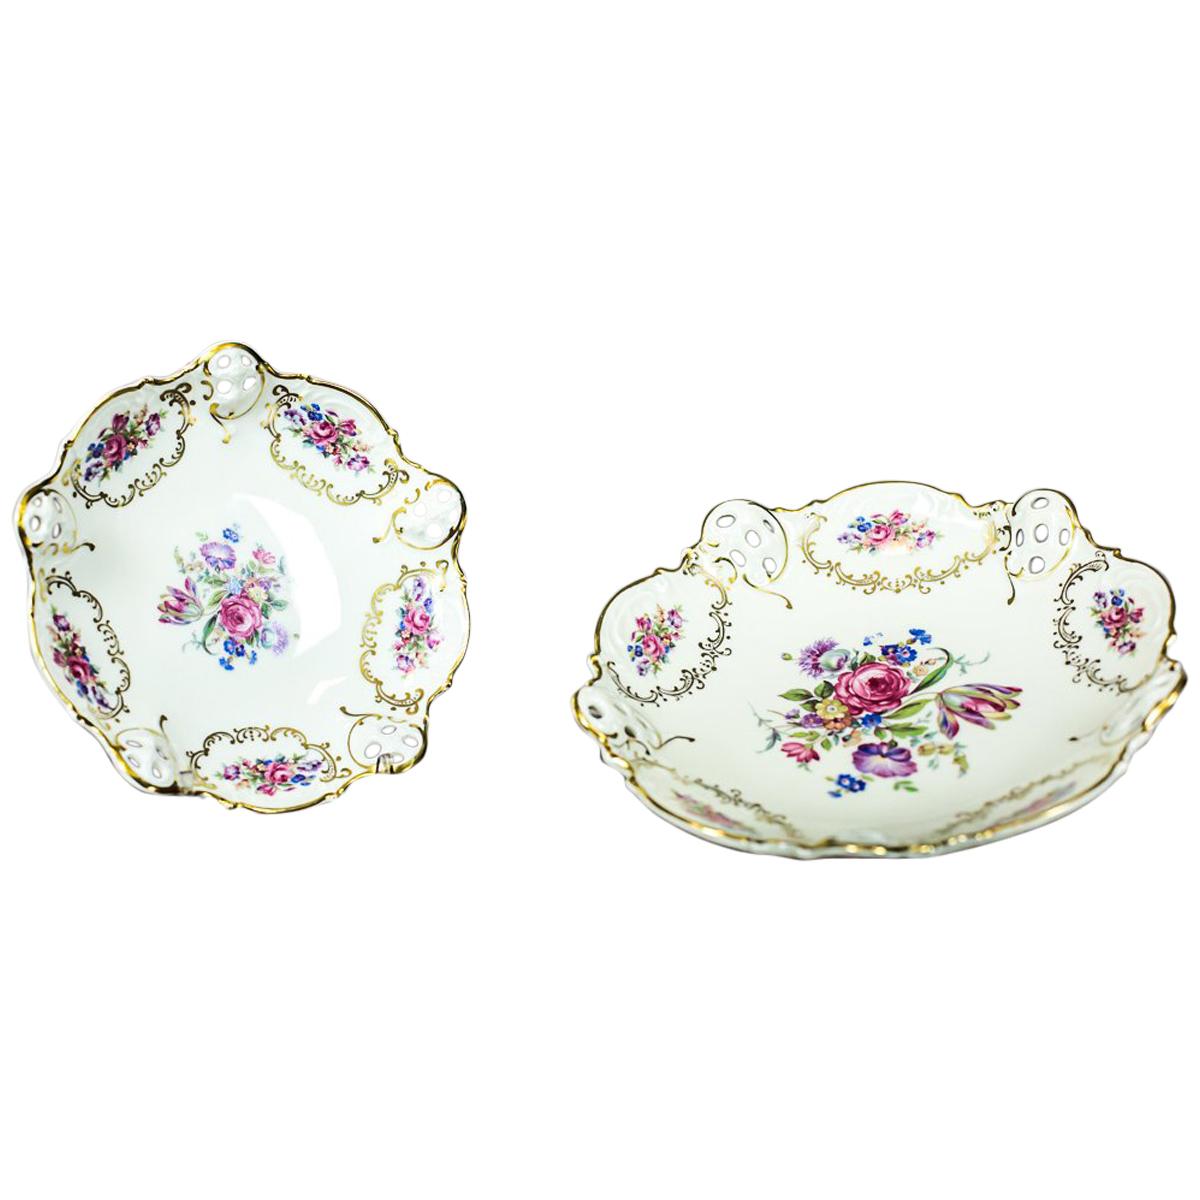 Two Rosenthal/Kronach 'Moliere Series' Epergnes, circa 1901-1933